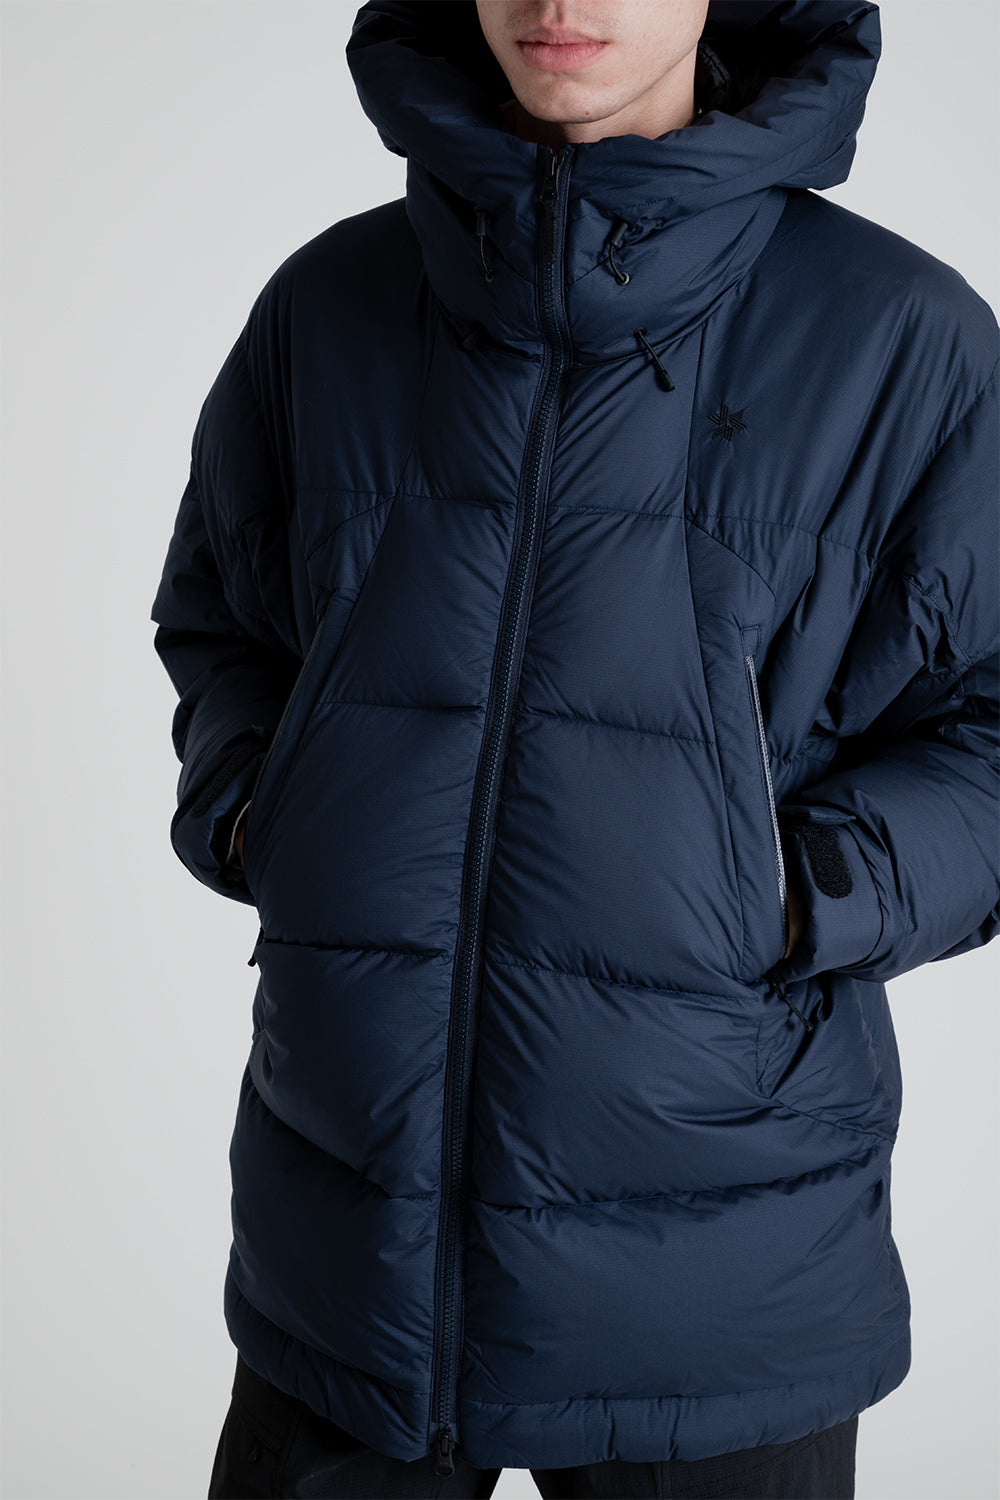 Goldwin Gore-Tex Infinium Fly Air Down Parka in Ink Navy